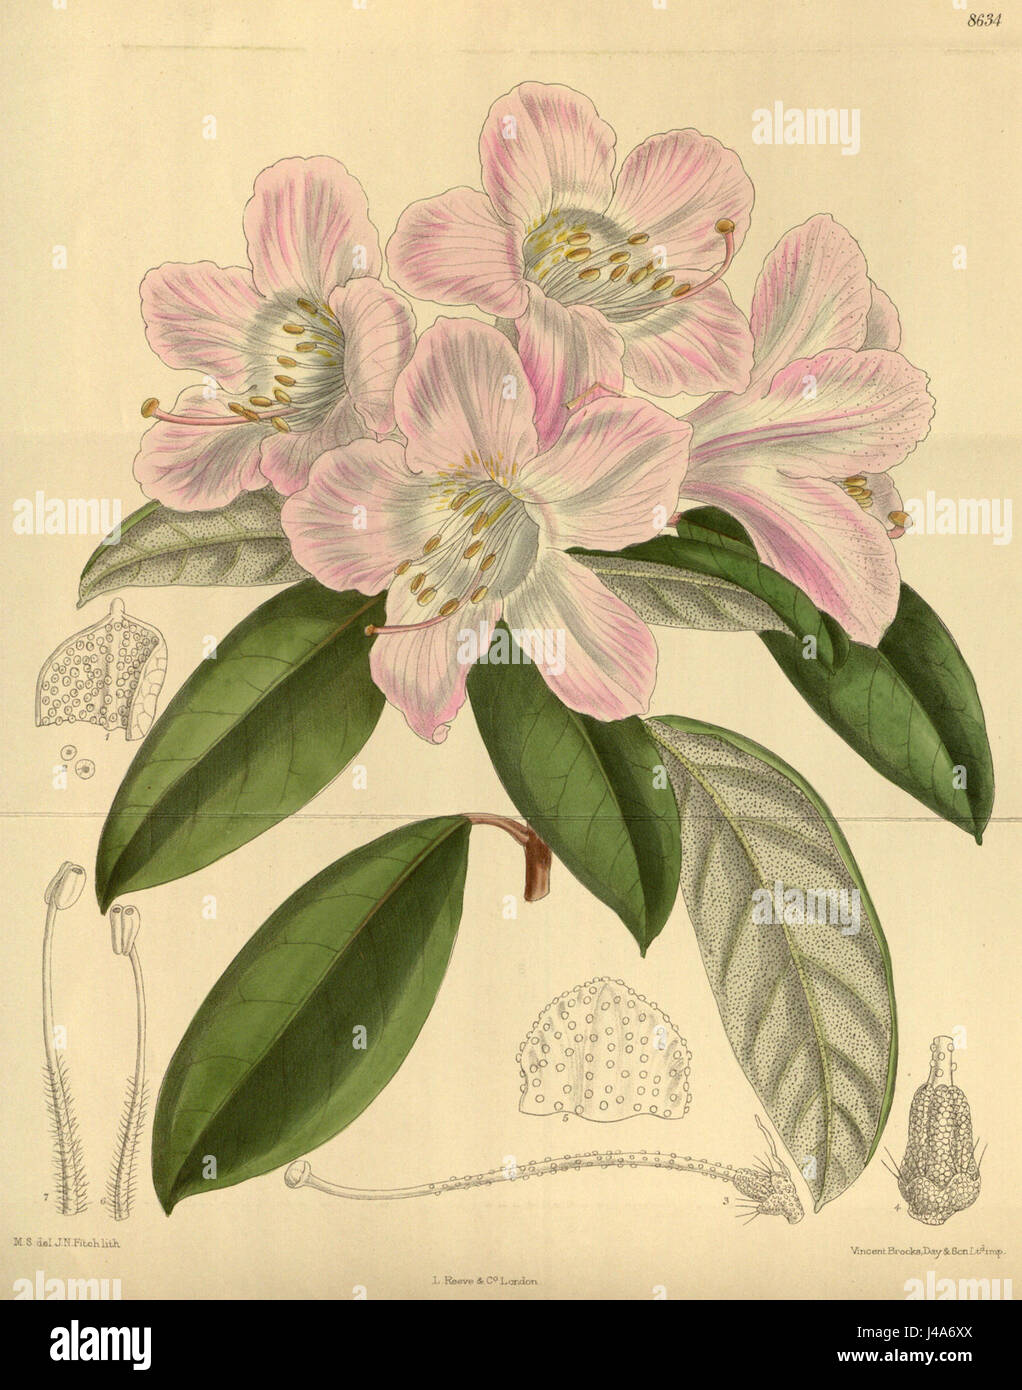 Rhododendron carneum 141 8634 Stock Photo